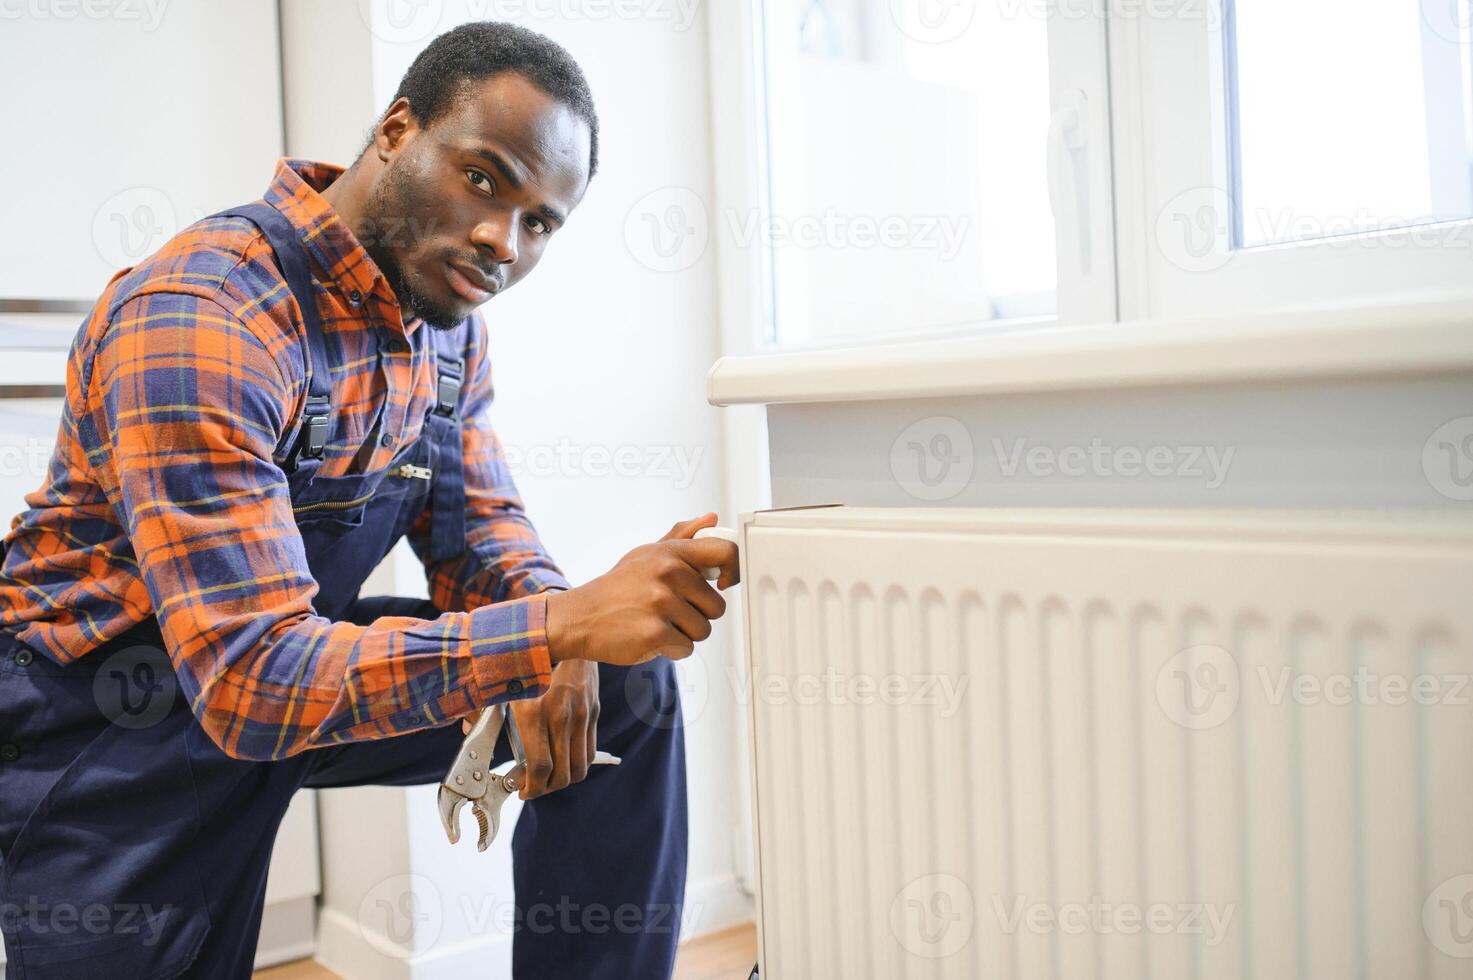 Repair heating radiator close-up. African man repairing radiator with wrench. Removing air from the radiator photo